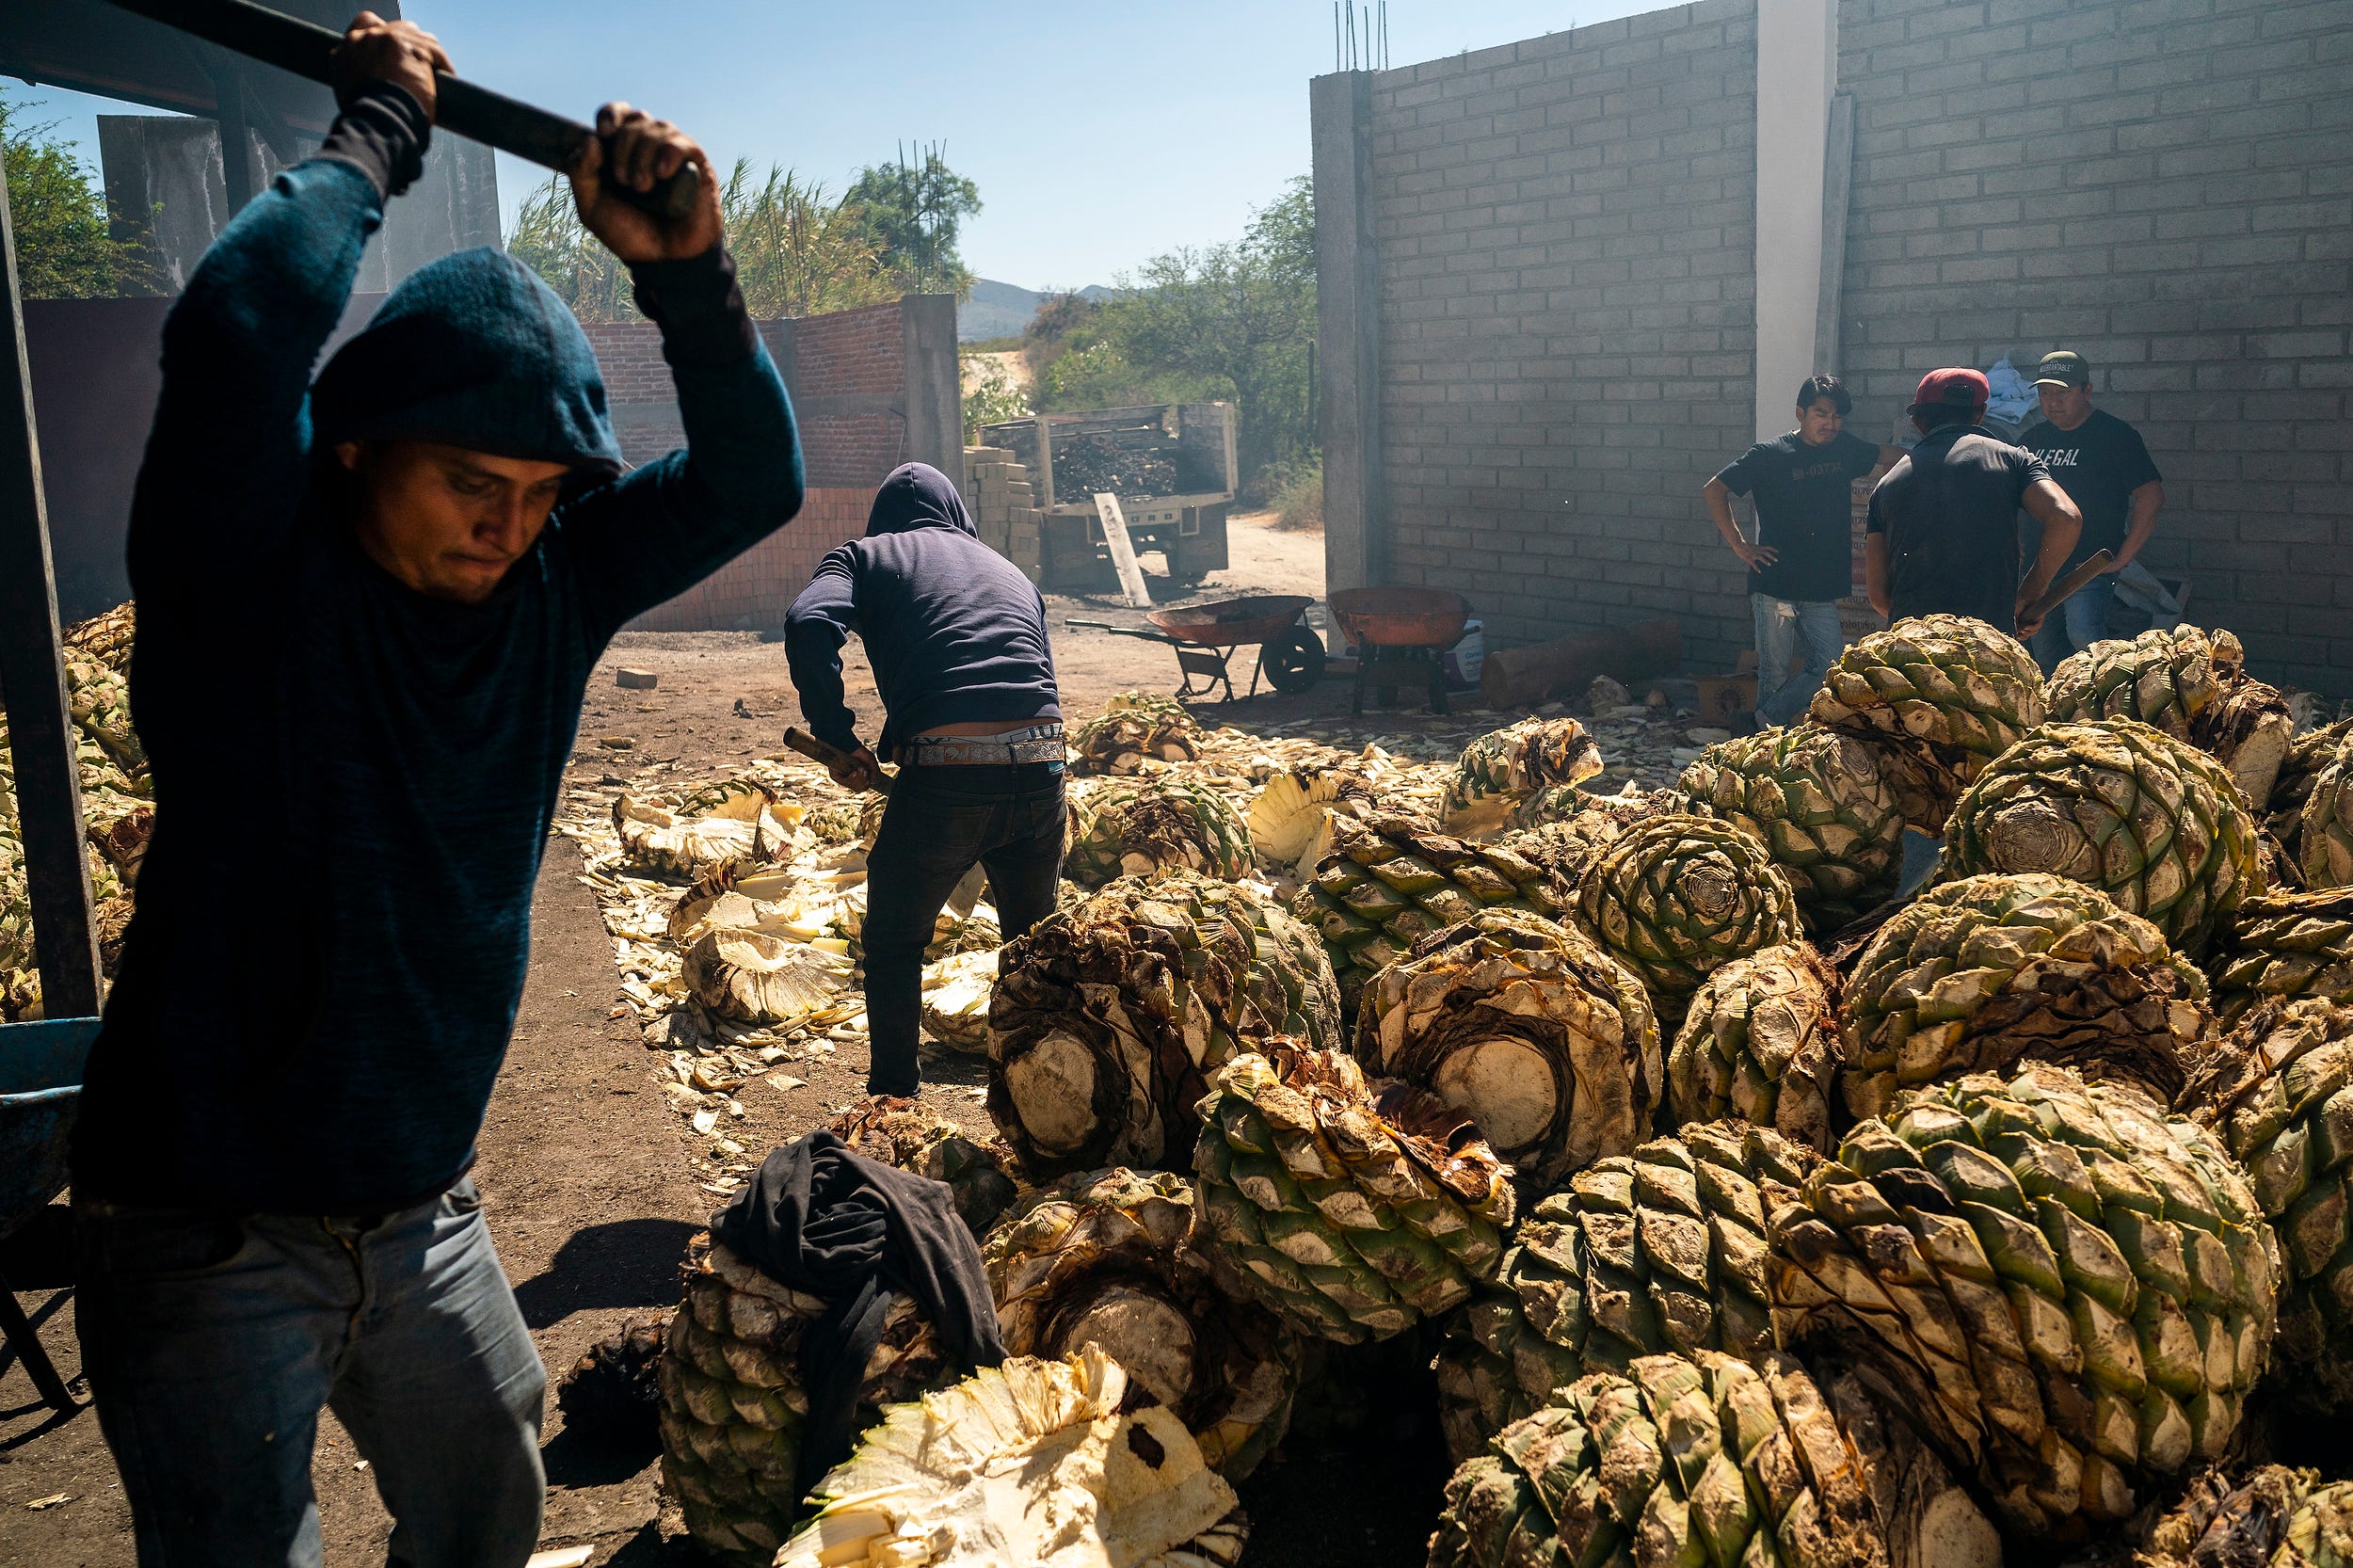 Employees cut agave hearts to place in the oven at Mal de Amor on Dec. 7, 2021, in Santiago Matatlán, Oaxaca, Mexico.